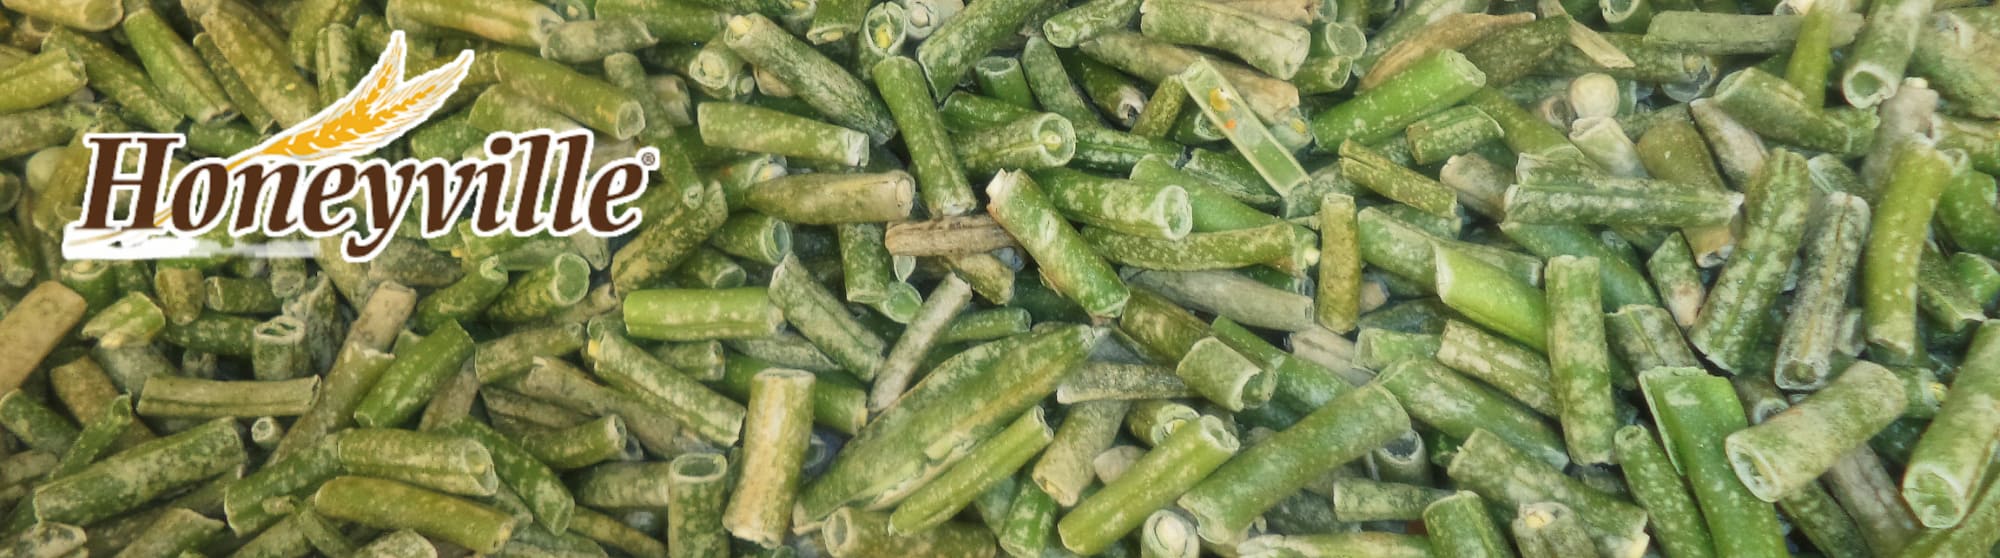 image of honeyville freeze dried green beans